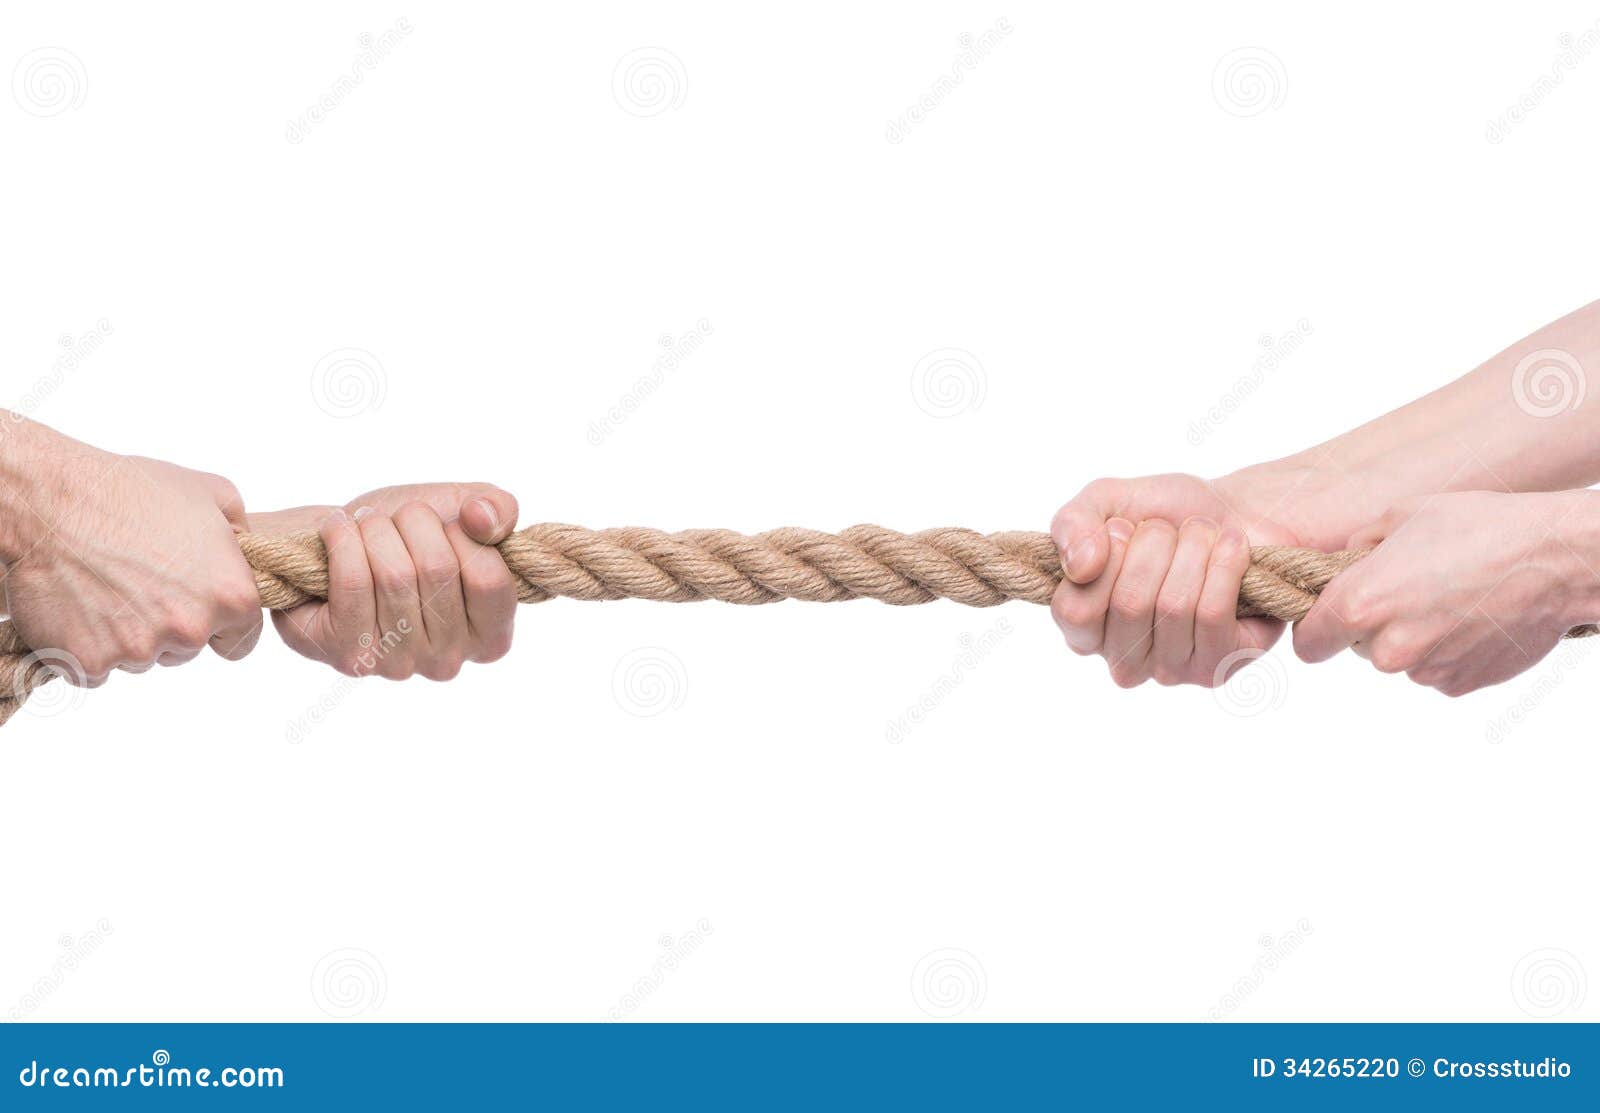 clipart tug of war rope - photo #42